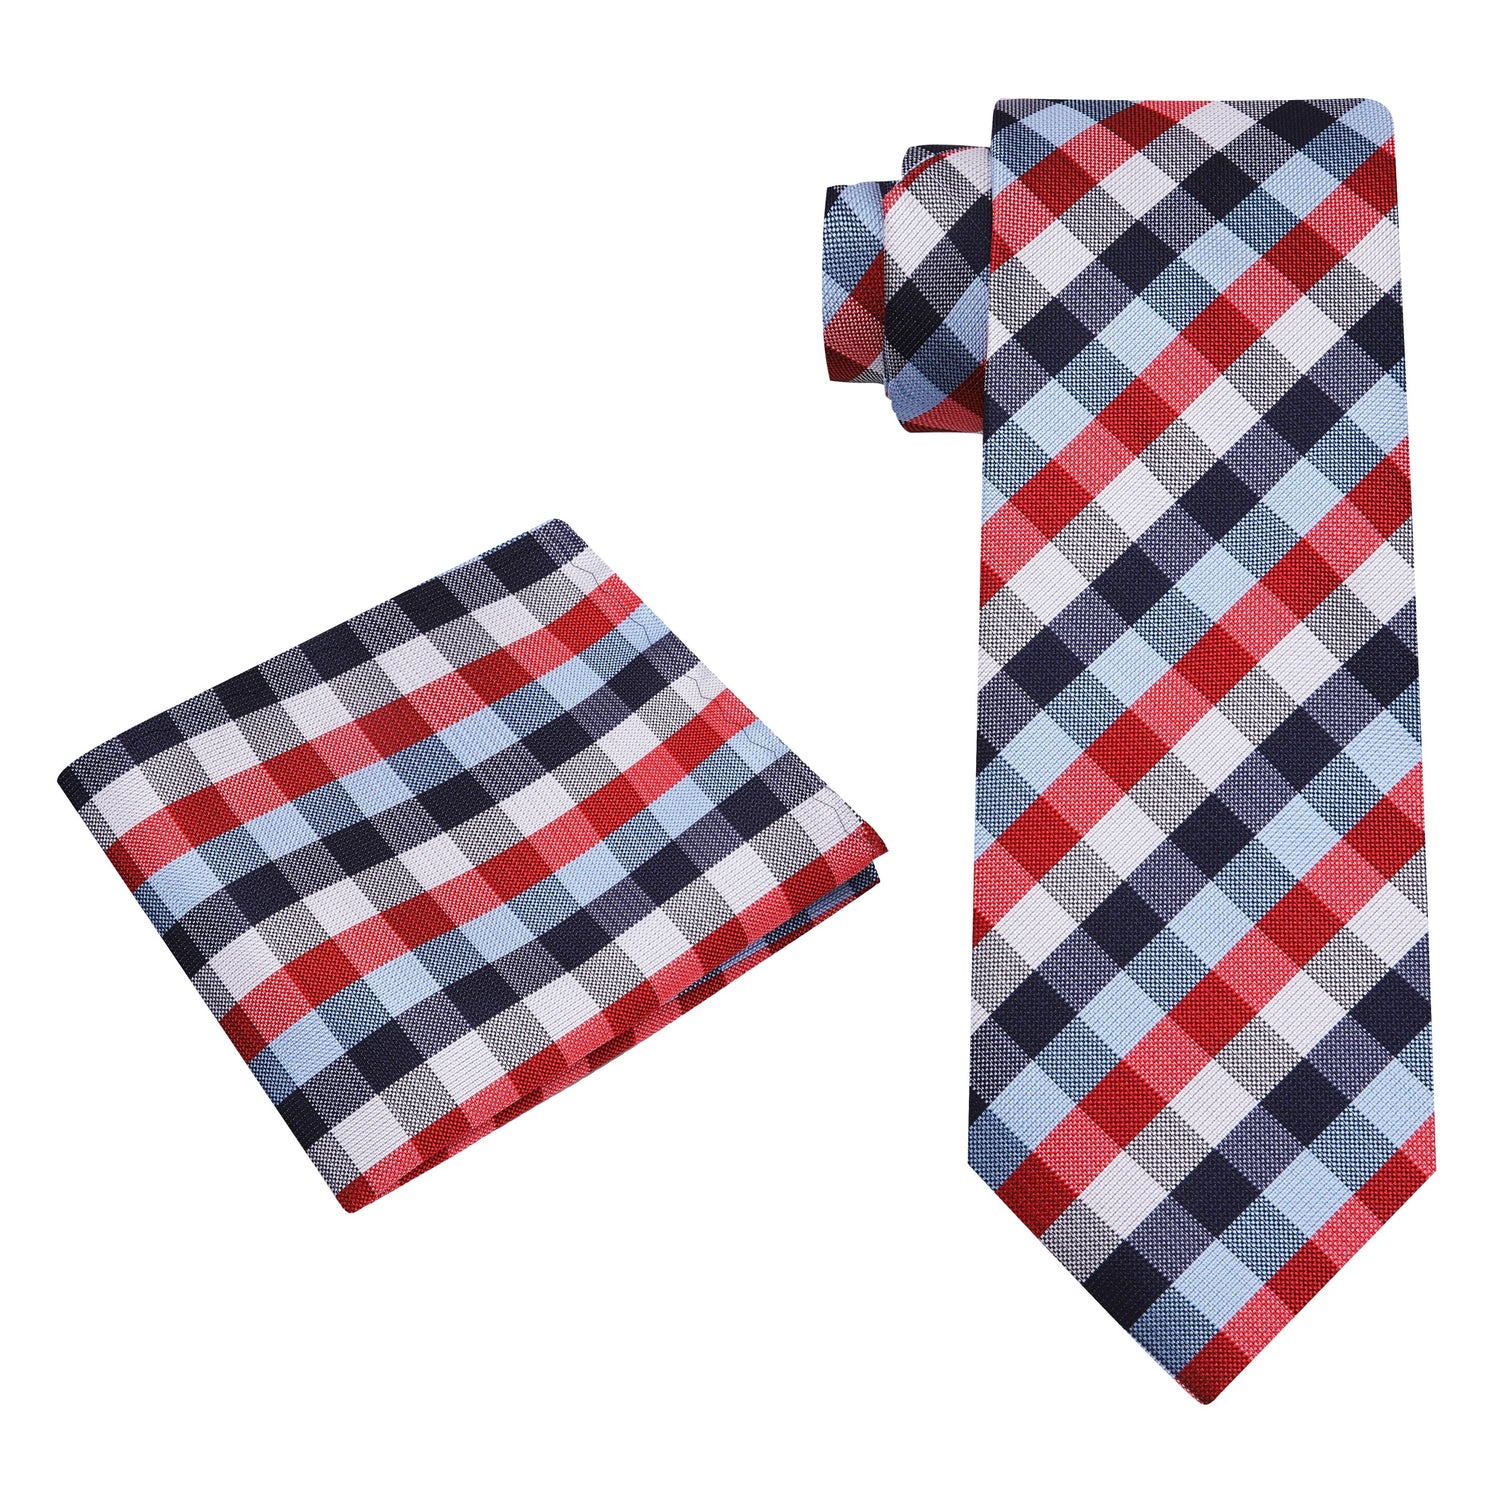 Alt View: A Red, White, Blue Geometric Check Pattern Silk Necktie, Matching Pocket Square